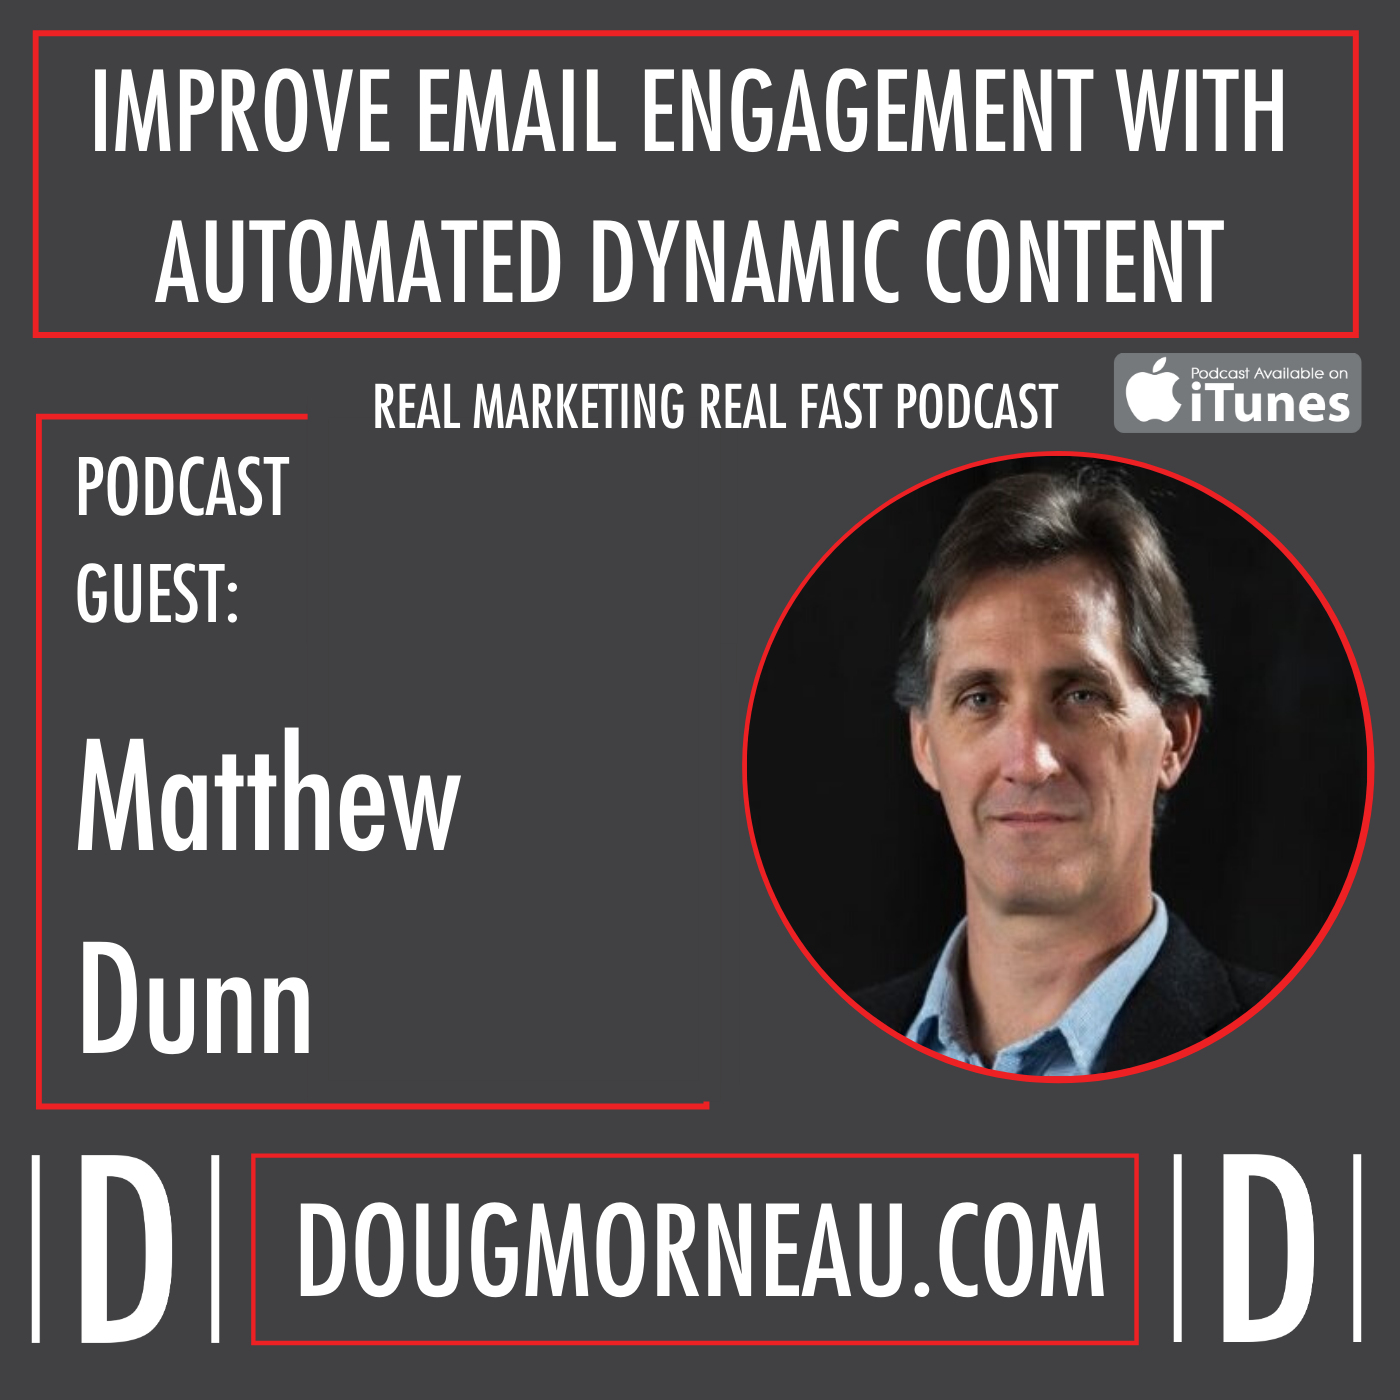 IMPROVE EMAIL ENGAGEMENT WITH AUTOMATED DYNAMIC CONTENT WITH MATTHEW DUNNE - DOUG MORNEAU - REAL MARKETING REAL FAST PODCAST